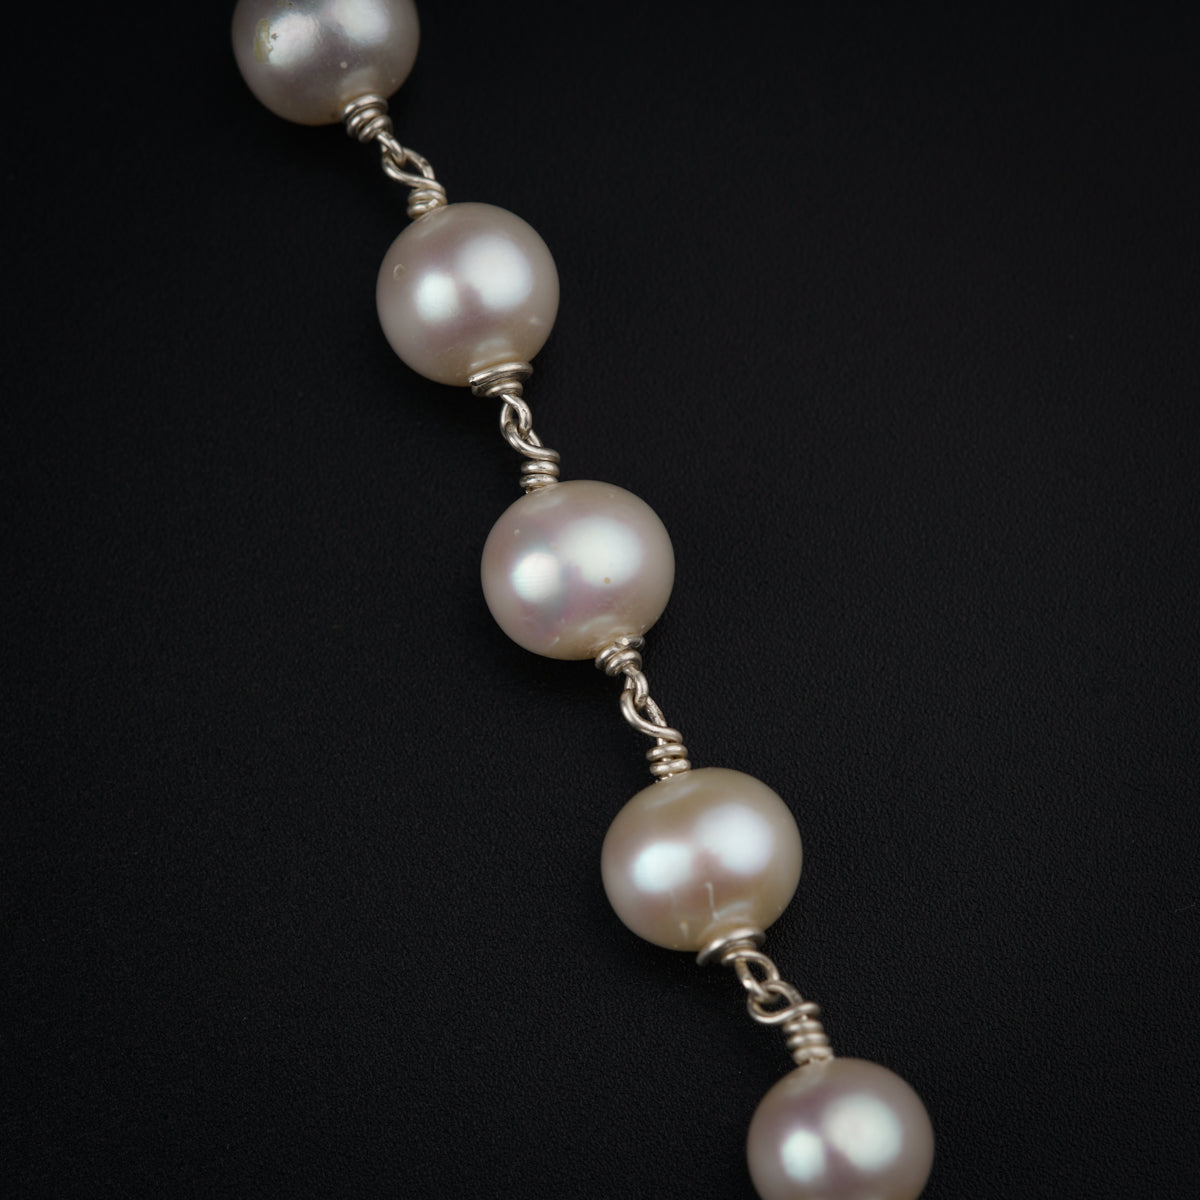 a close up of a bracelet with pearls